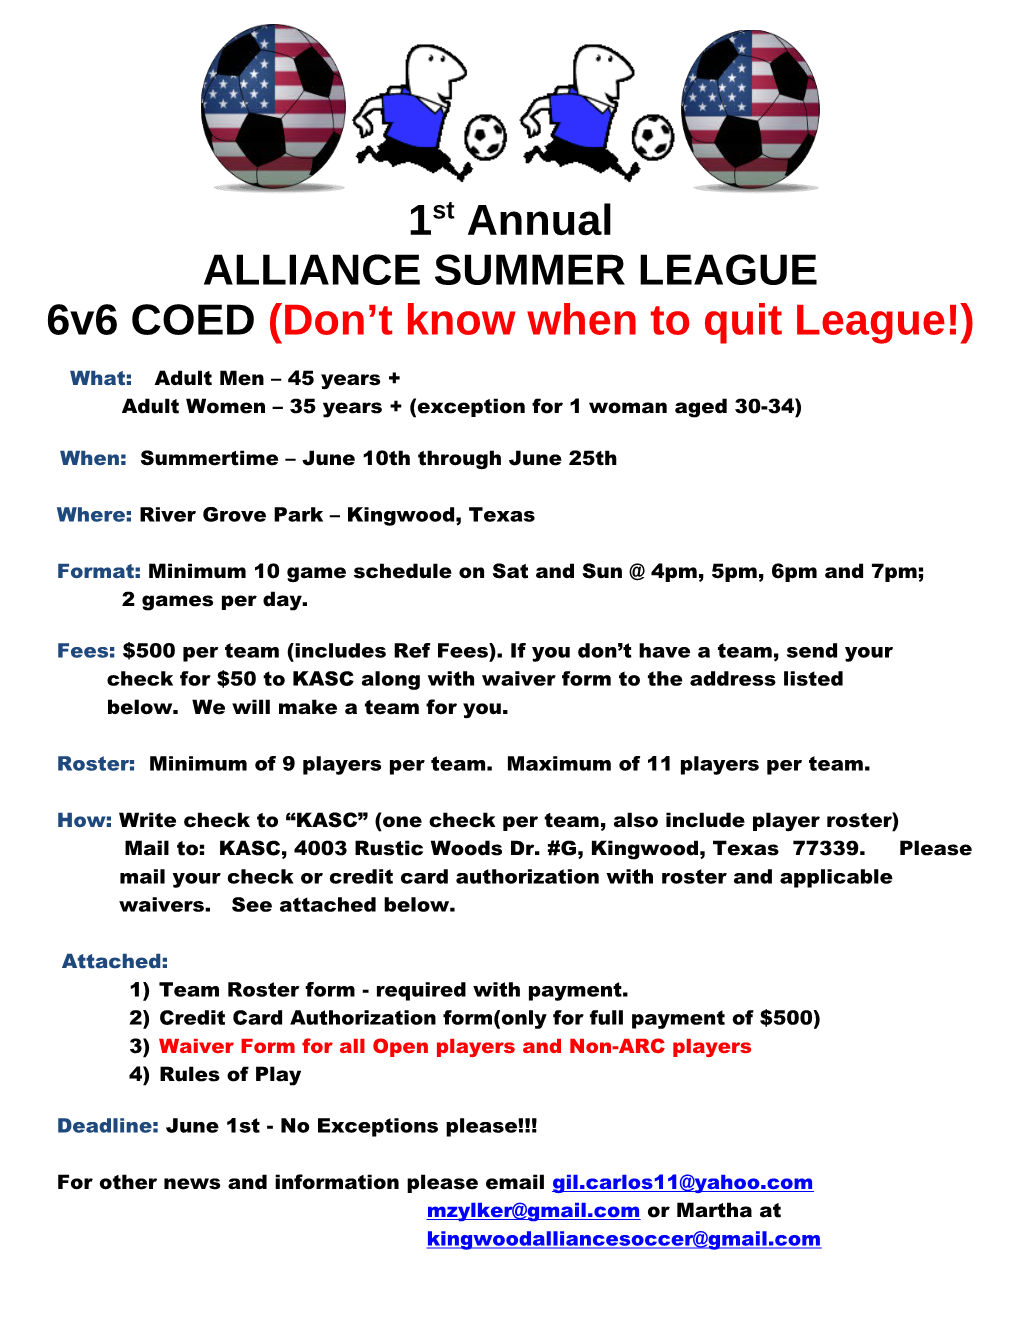 6V6 COED (Don T Know When to Quit League!)